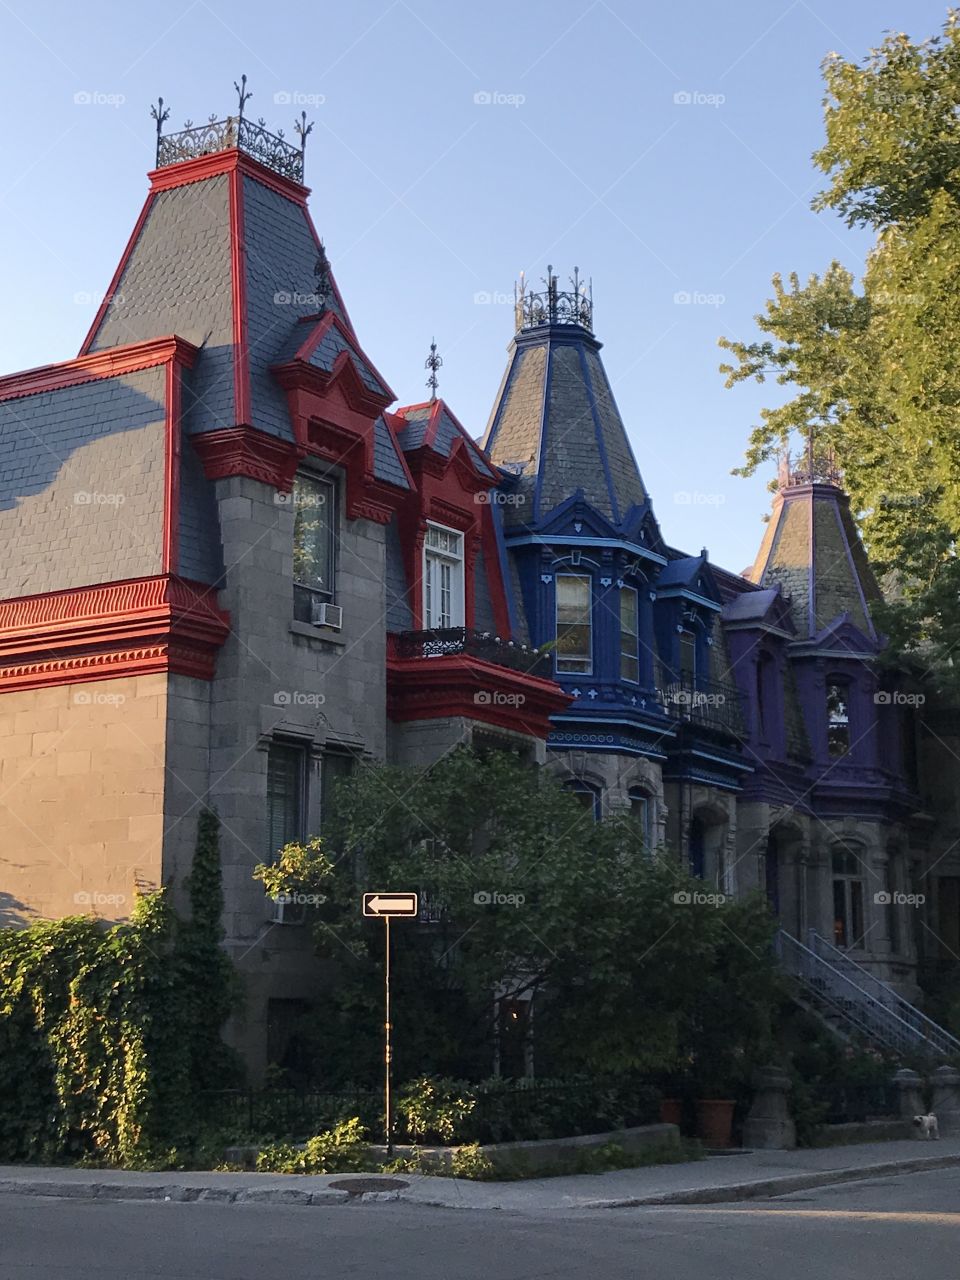 Painted Ladies (Victorian houses) on the Carré St-Louis in the Plateau neighborhood of Montréal, Canada